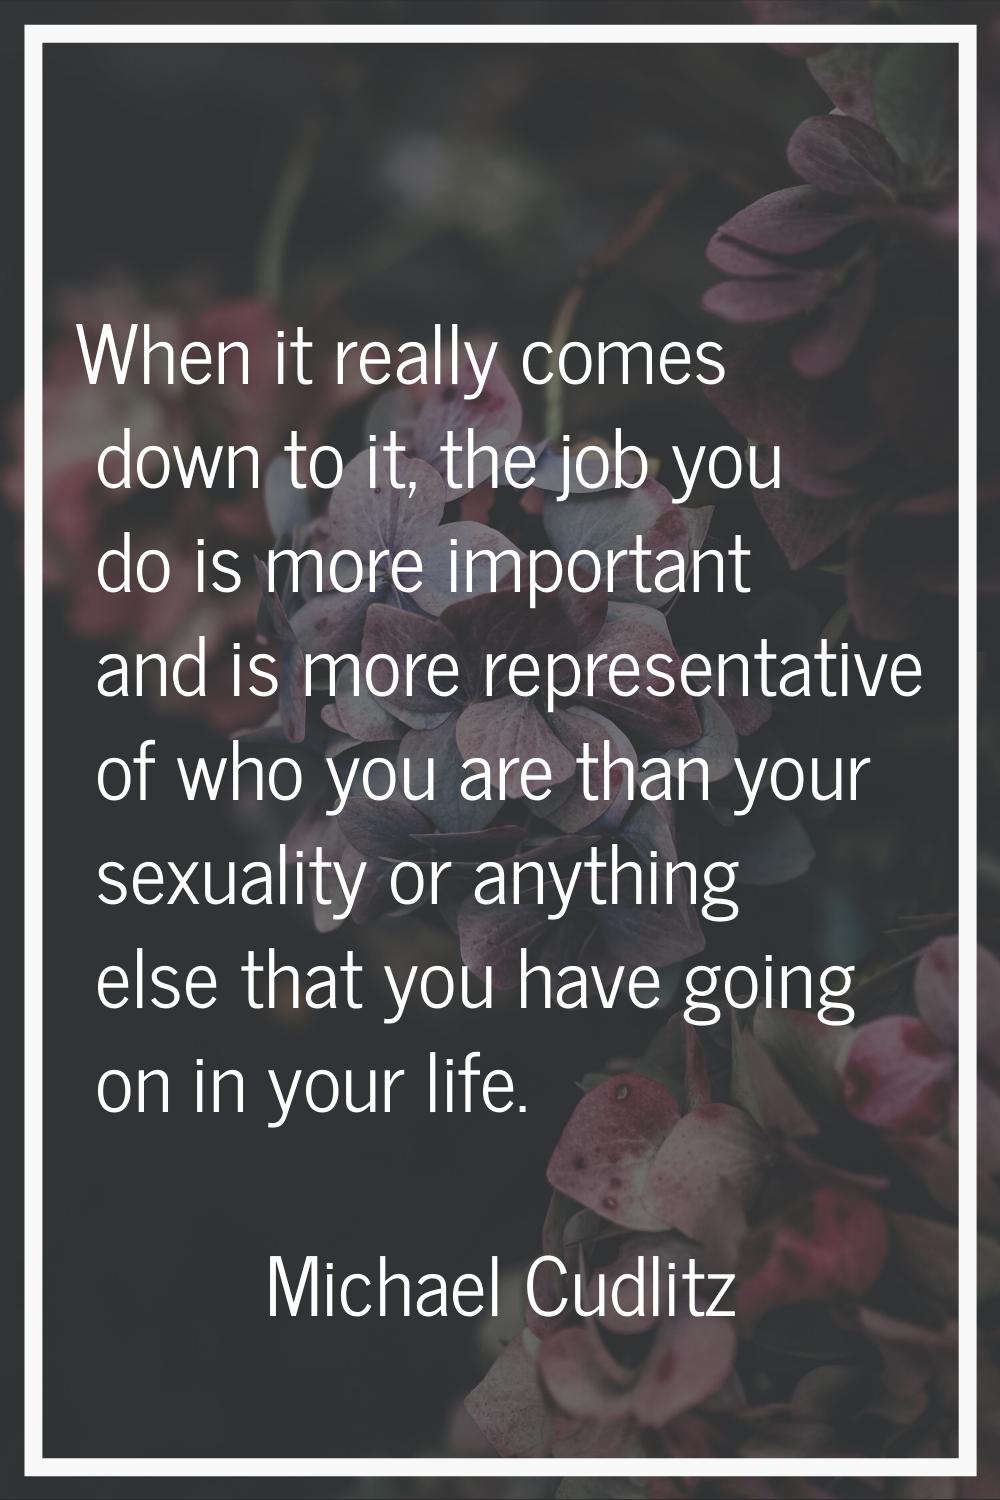 When it really comes down to it, the job you do is more important and is more representative of who